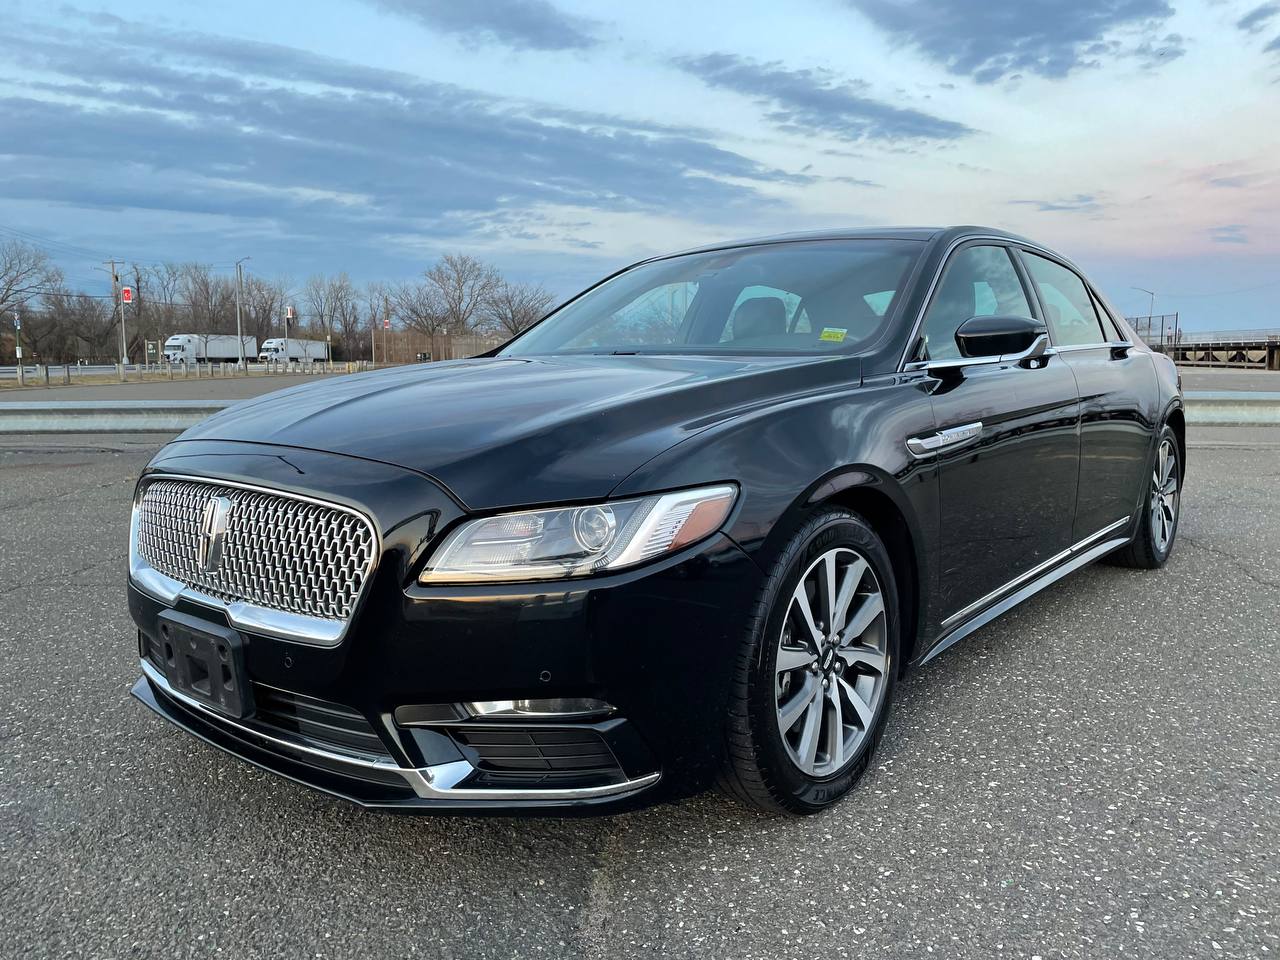 Used Car - 2018 Lincoln Continental for Sale in Staten Island, NY